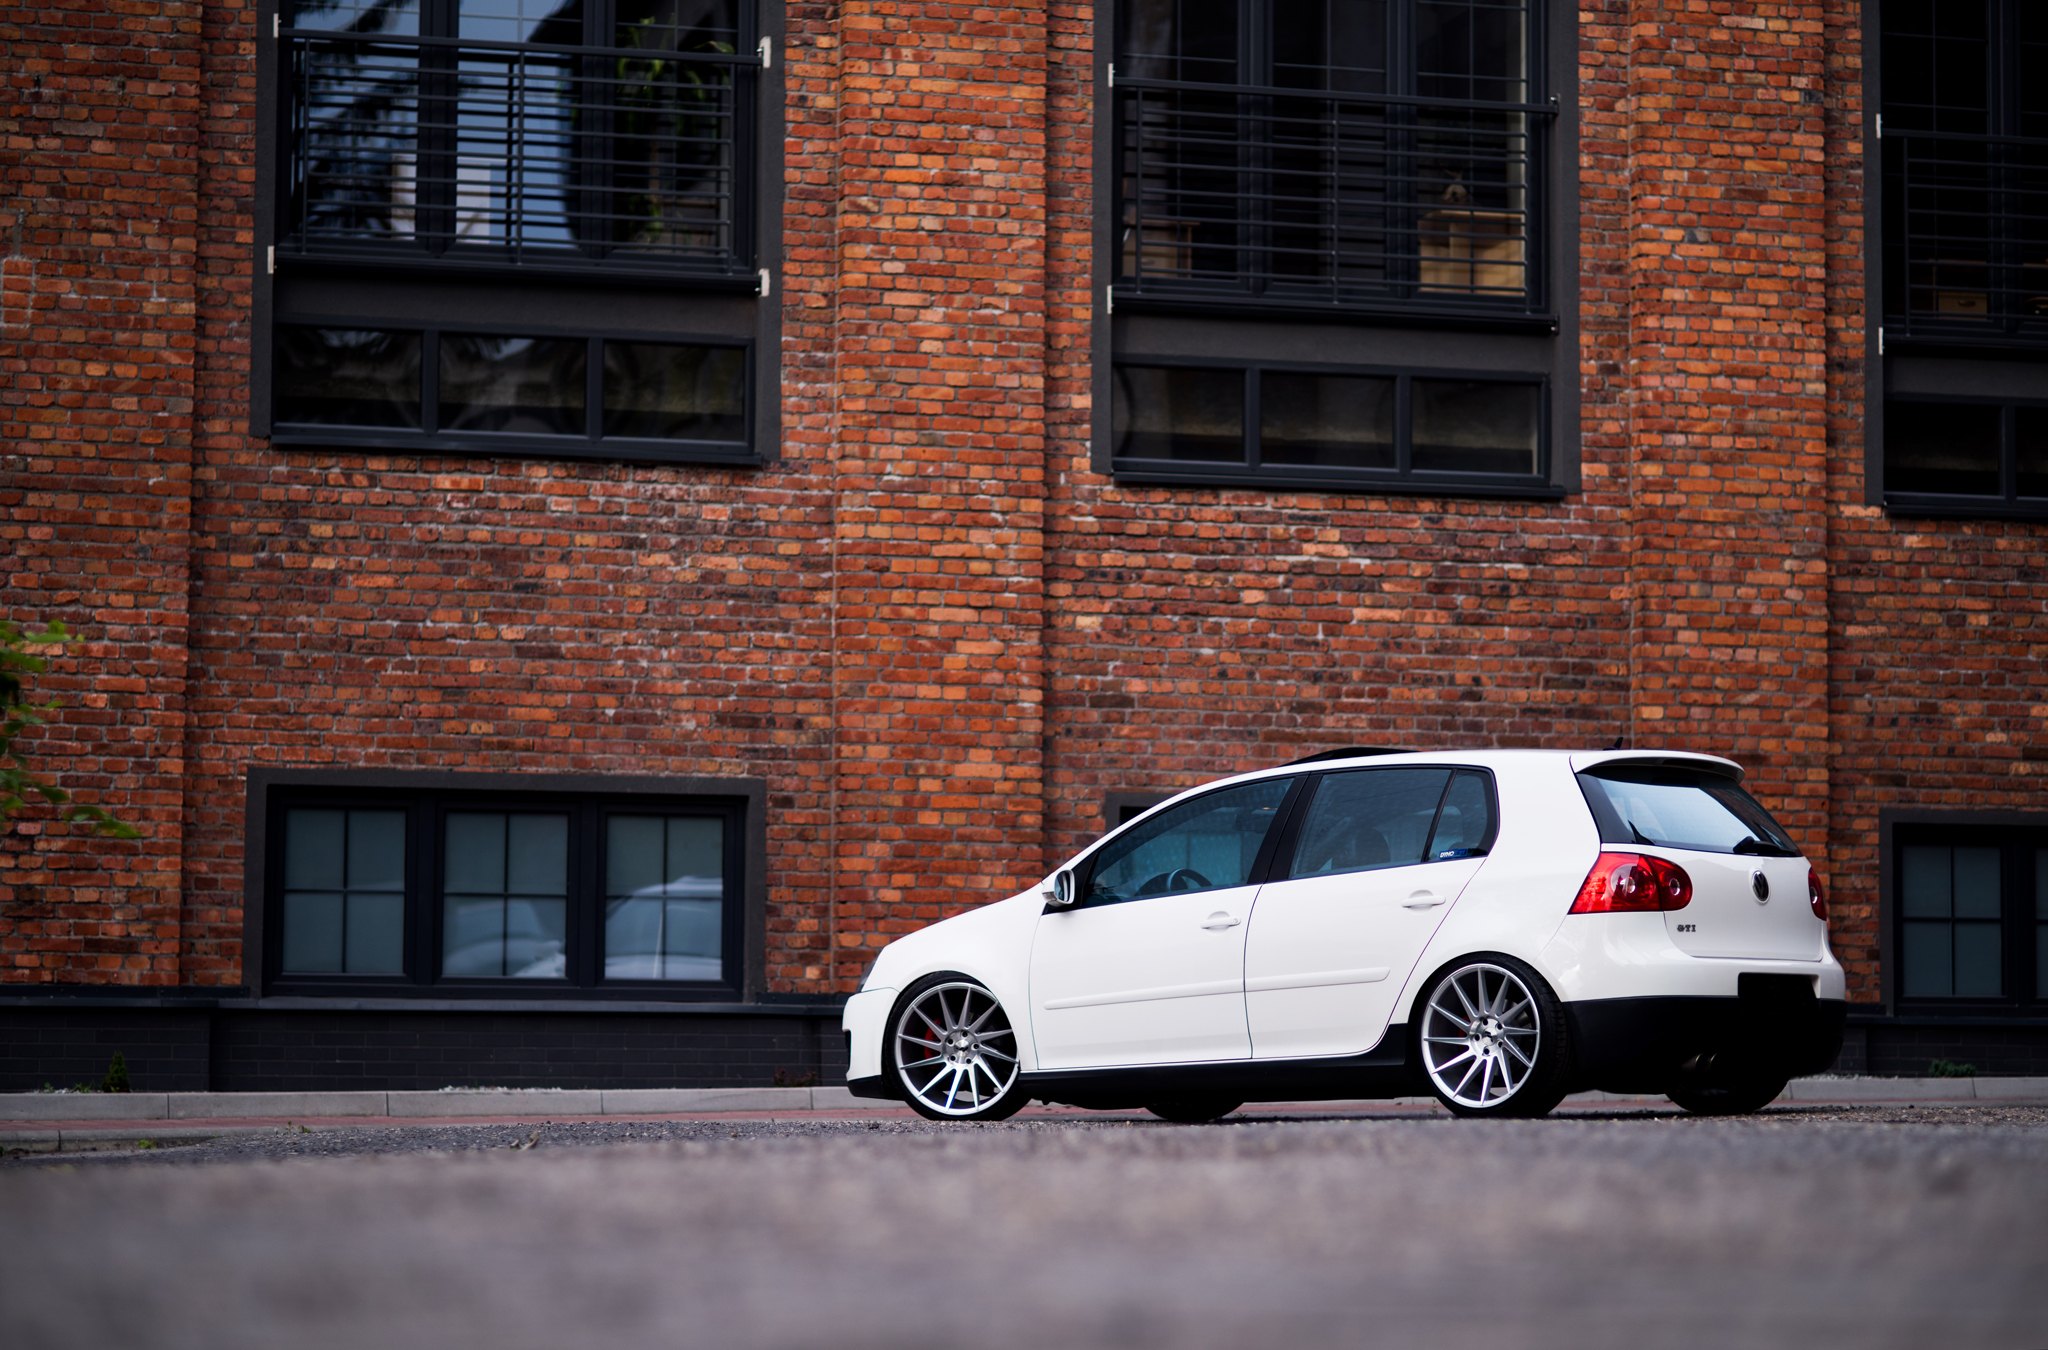 Aftermarket Side Skirts on White VW Golf - Photo by JR Wheels